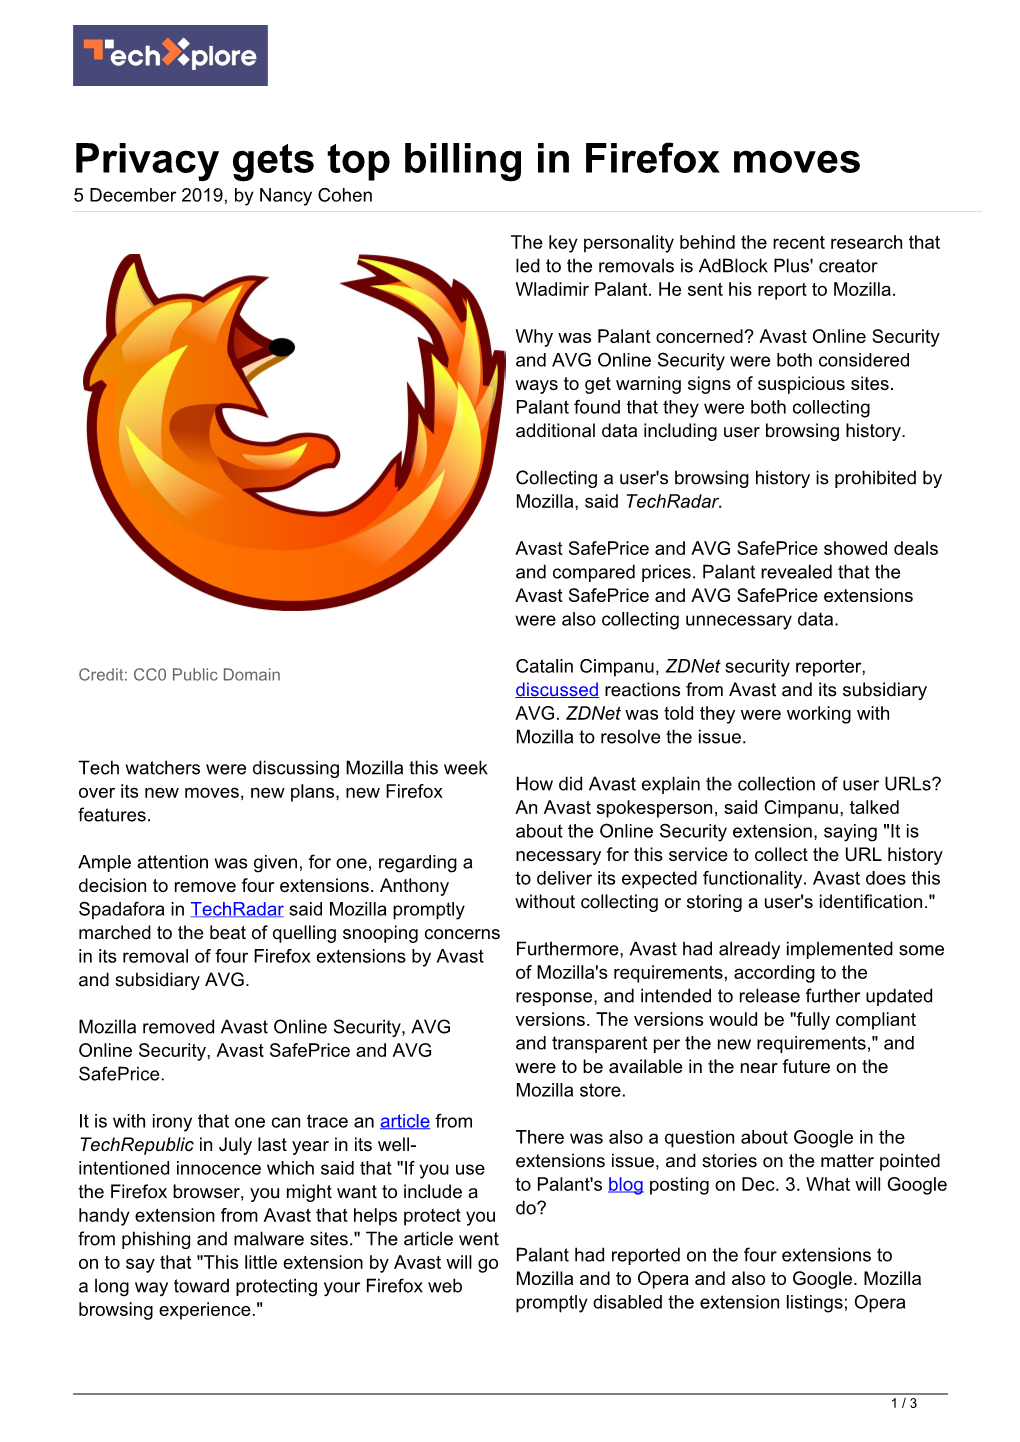 Privacy Gets Top Billing in Firefox Moves 5 December 2019, by Nancy Cohen